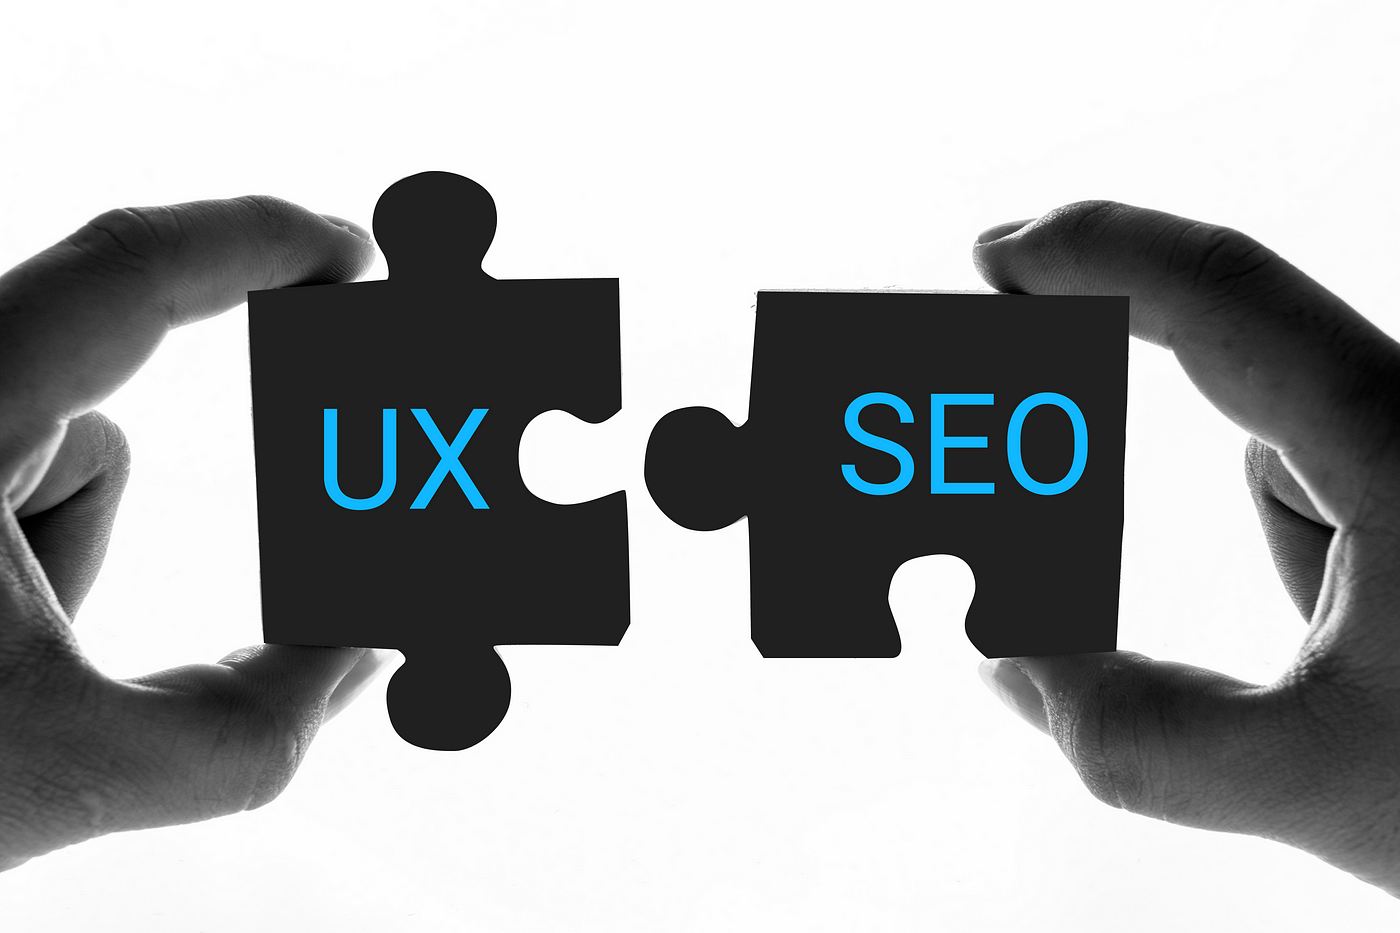 How To Find And Fill A Content Gap For SEO And UX?